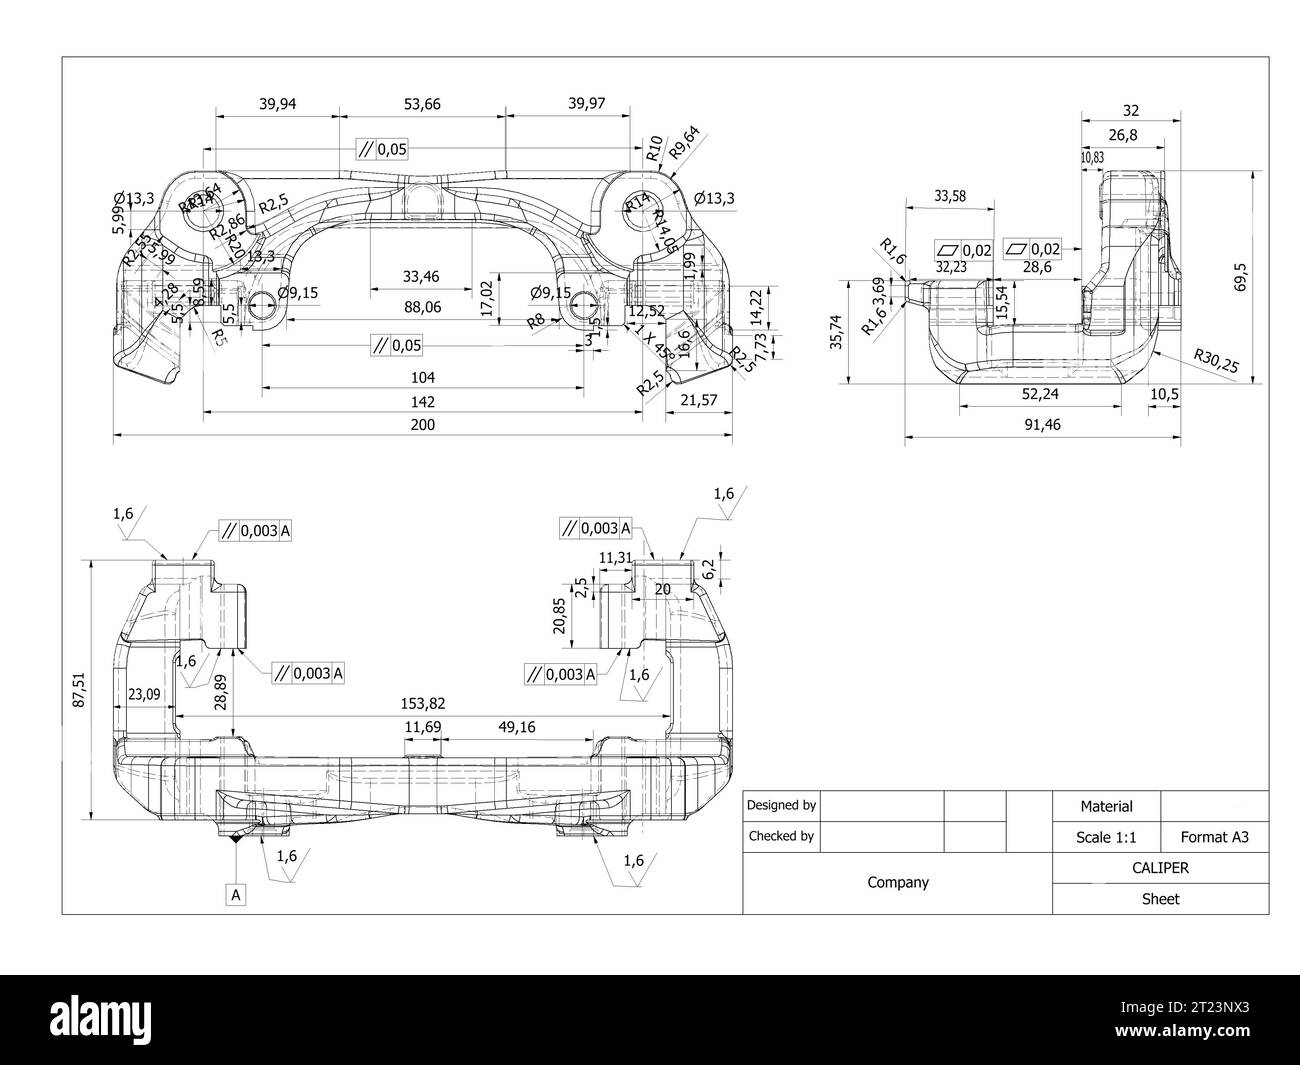 caliper car technical design ,forces applied fem finite analysis, engineering testing before manufacturing Stock Photo